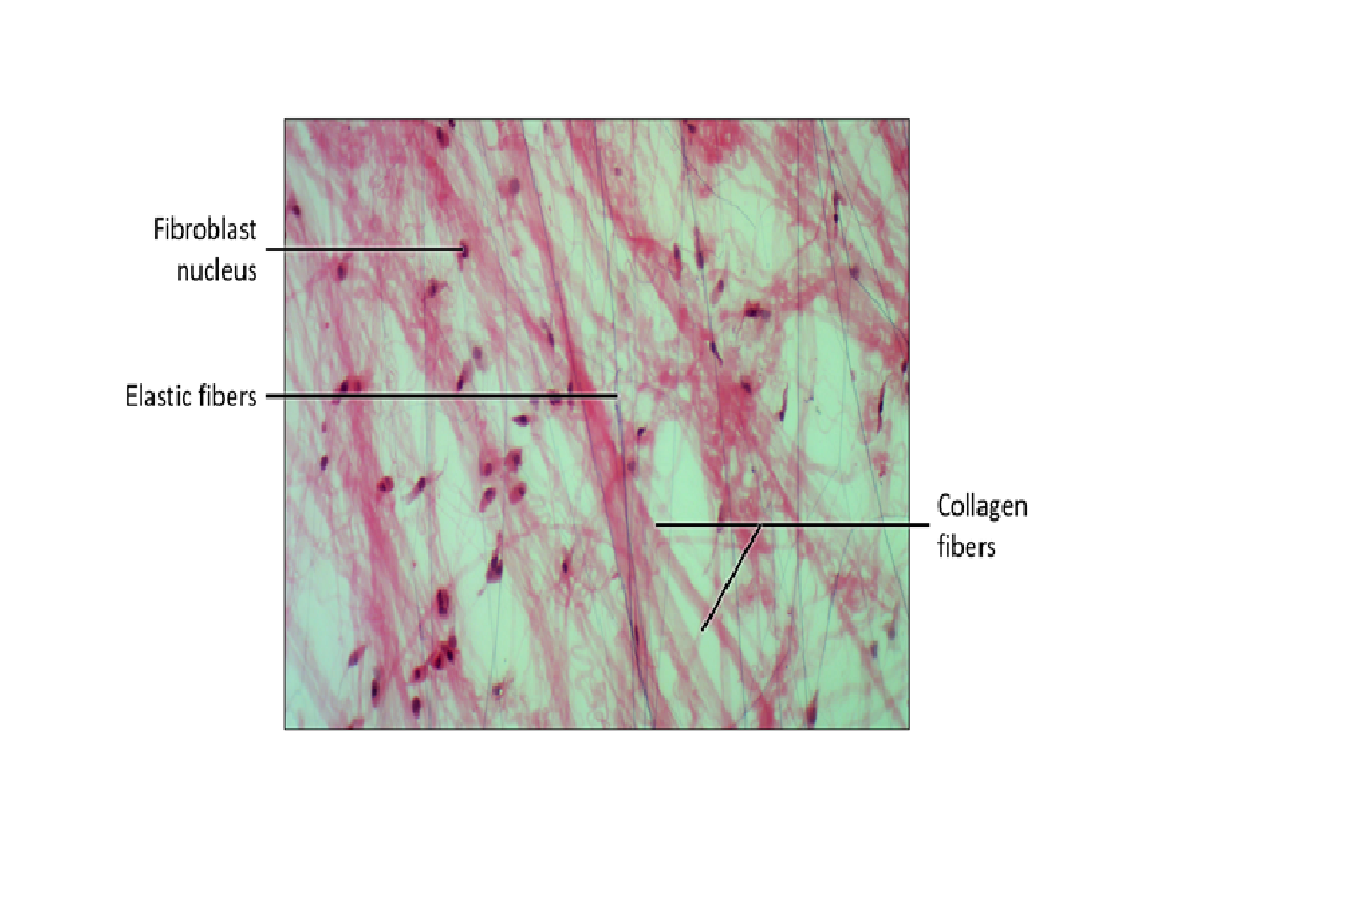 labeled areolar tissue